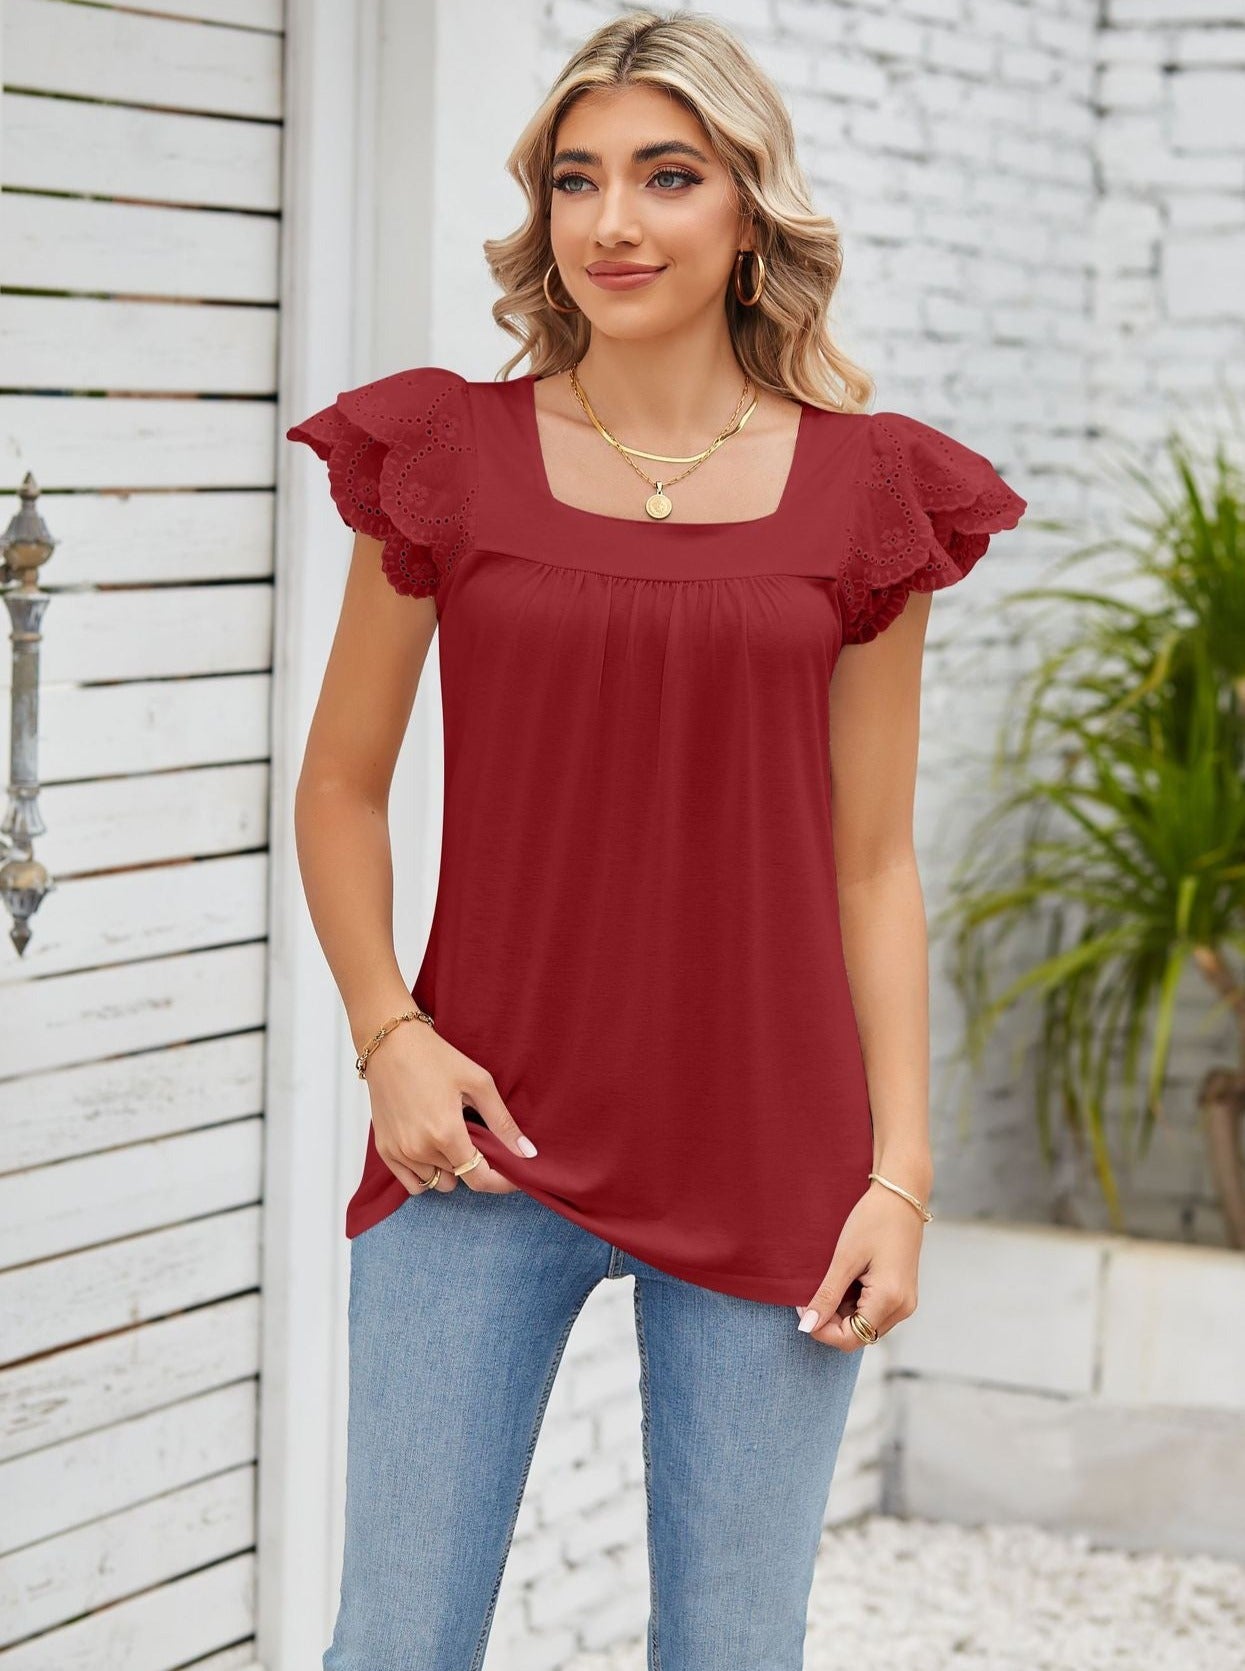 Red Lace Stitching Square Collar Petal Short-Sleeved Shirt